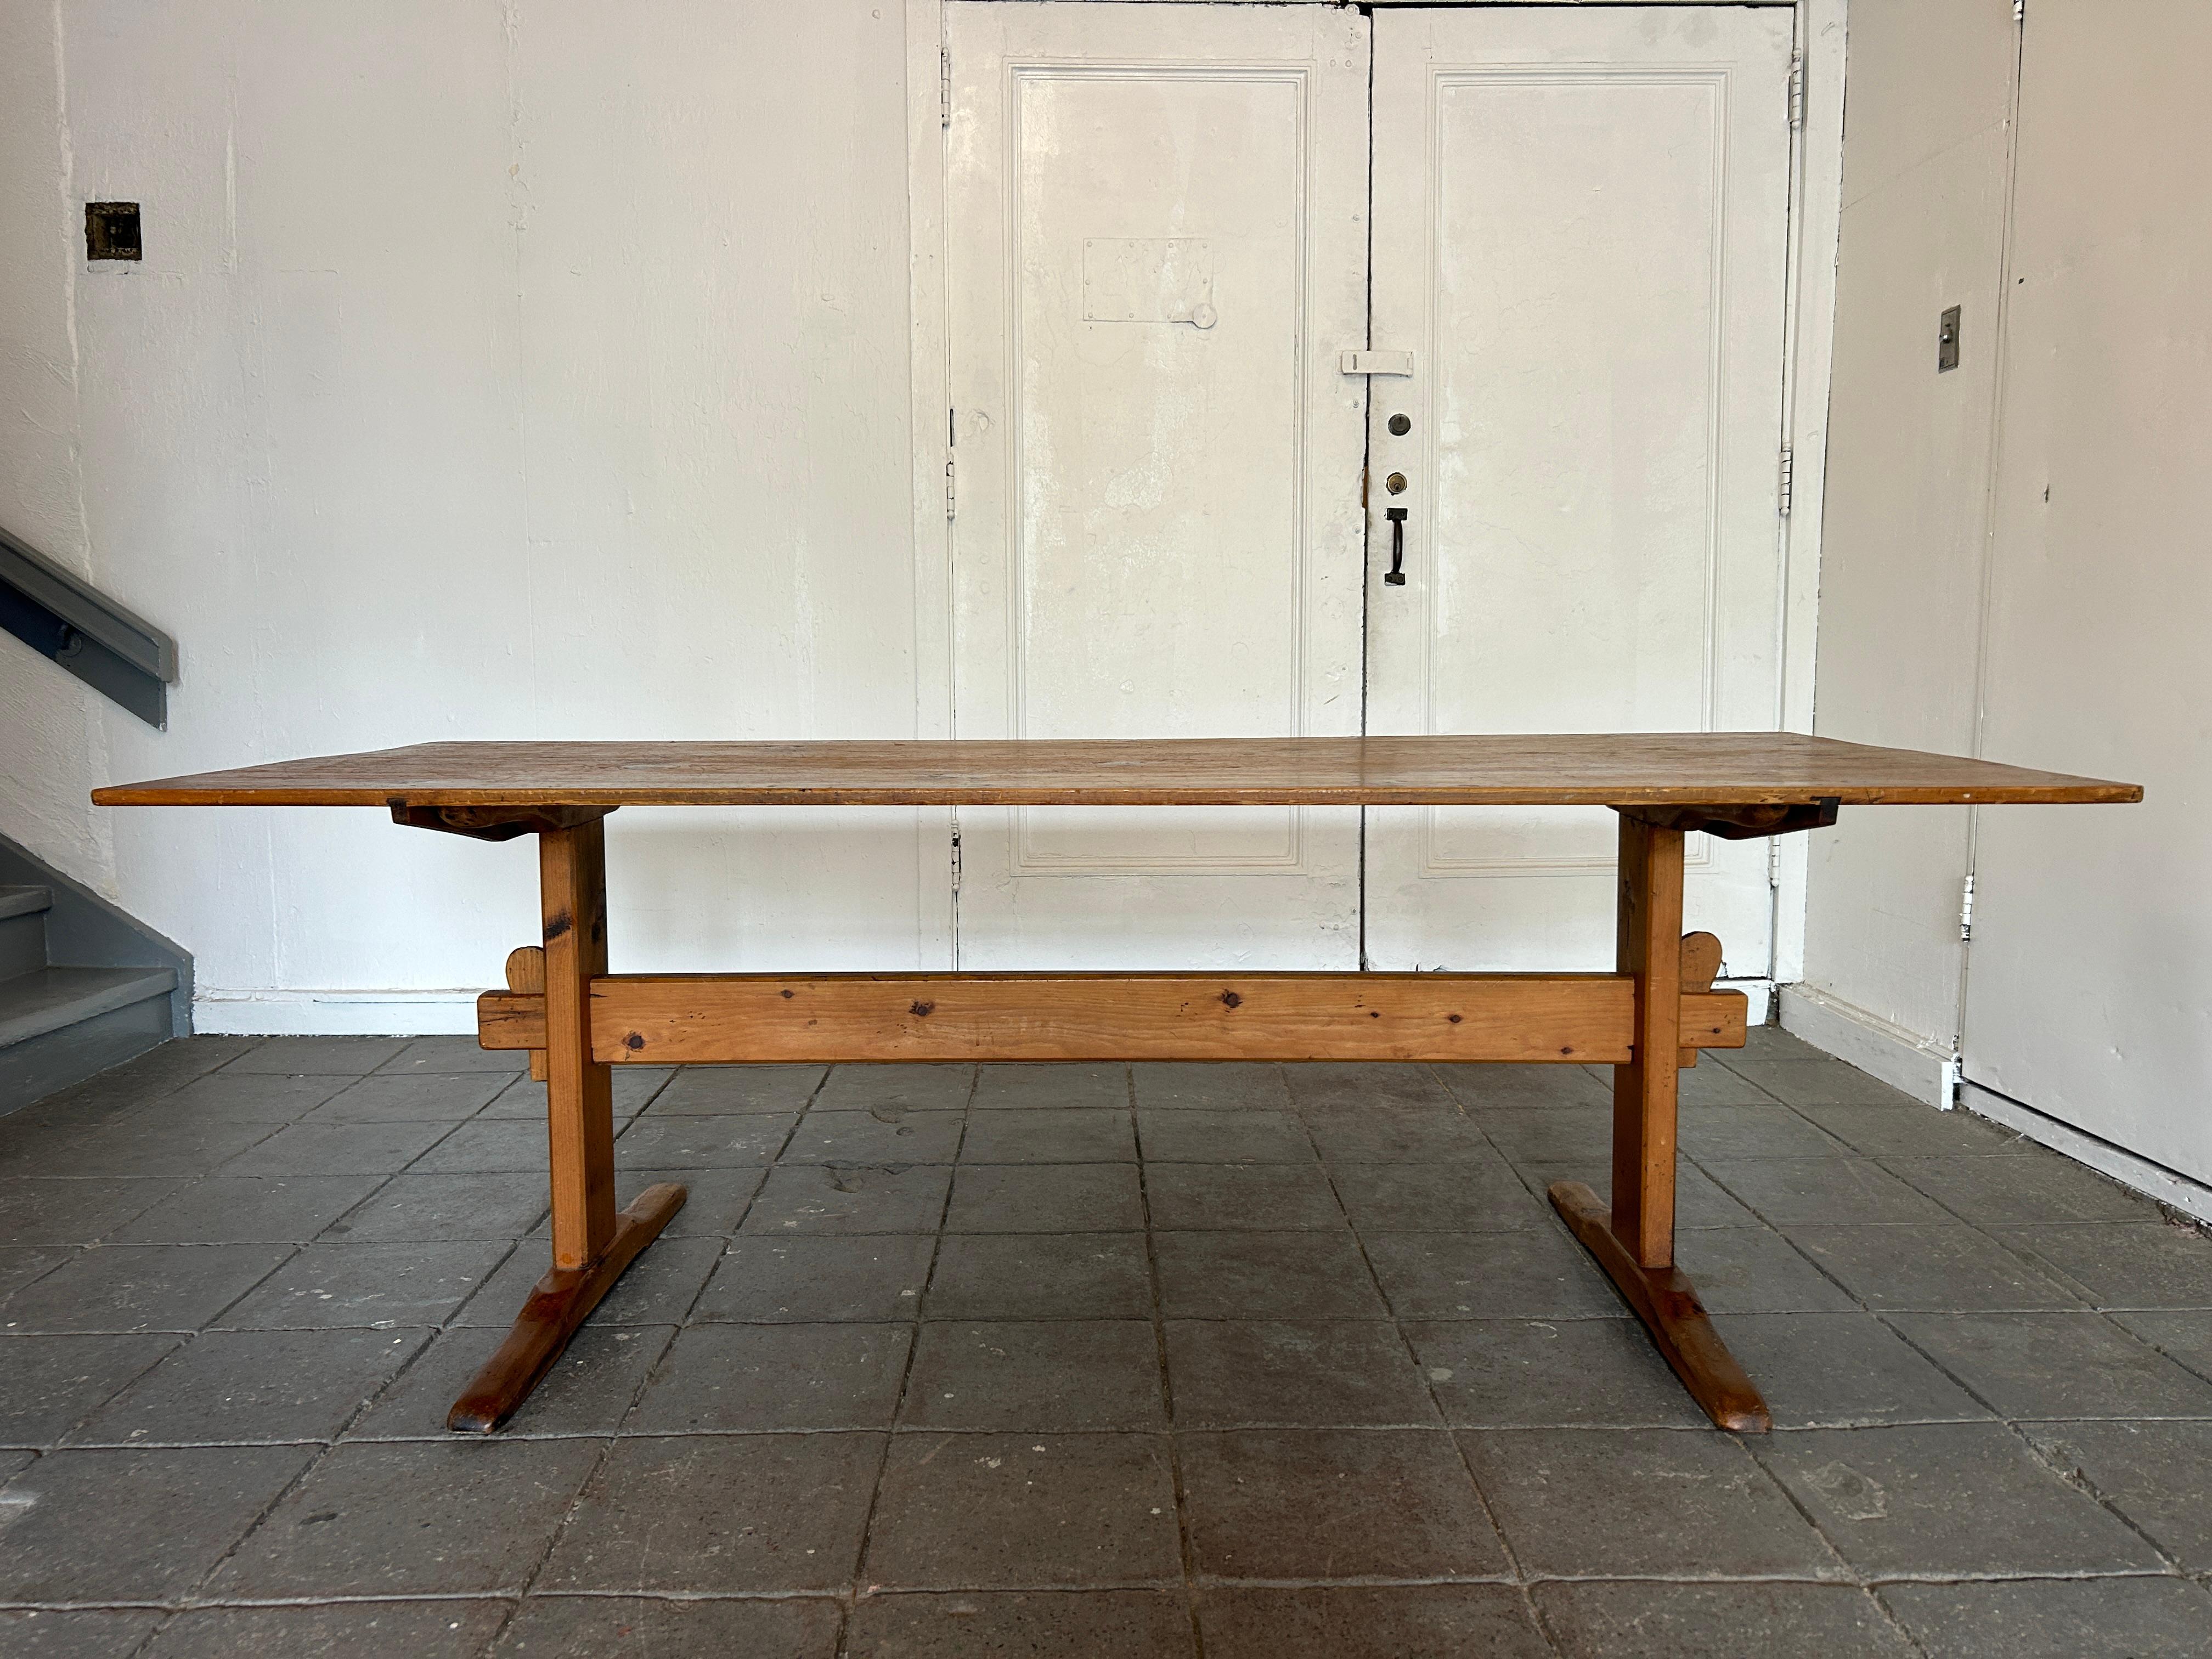 Vintage Antique early American rustic solid Pine farm house trestle dining table. This table has a solid pine base with 84